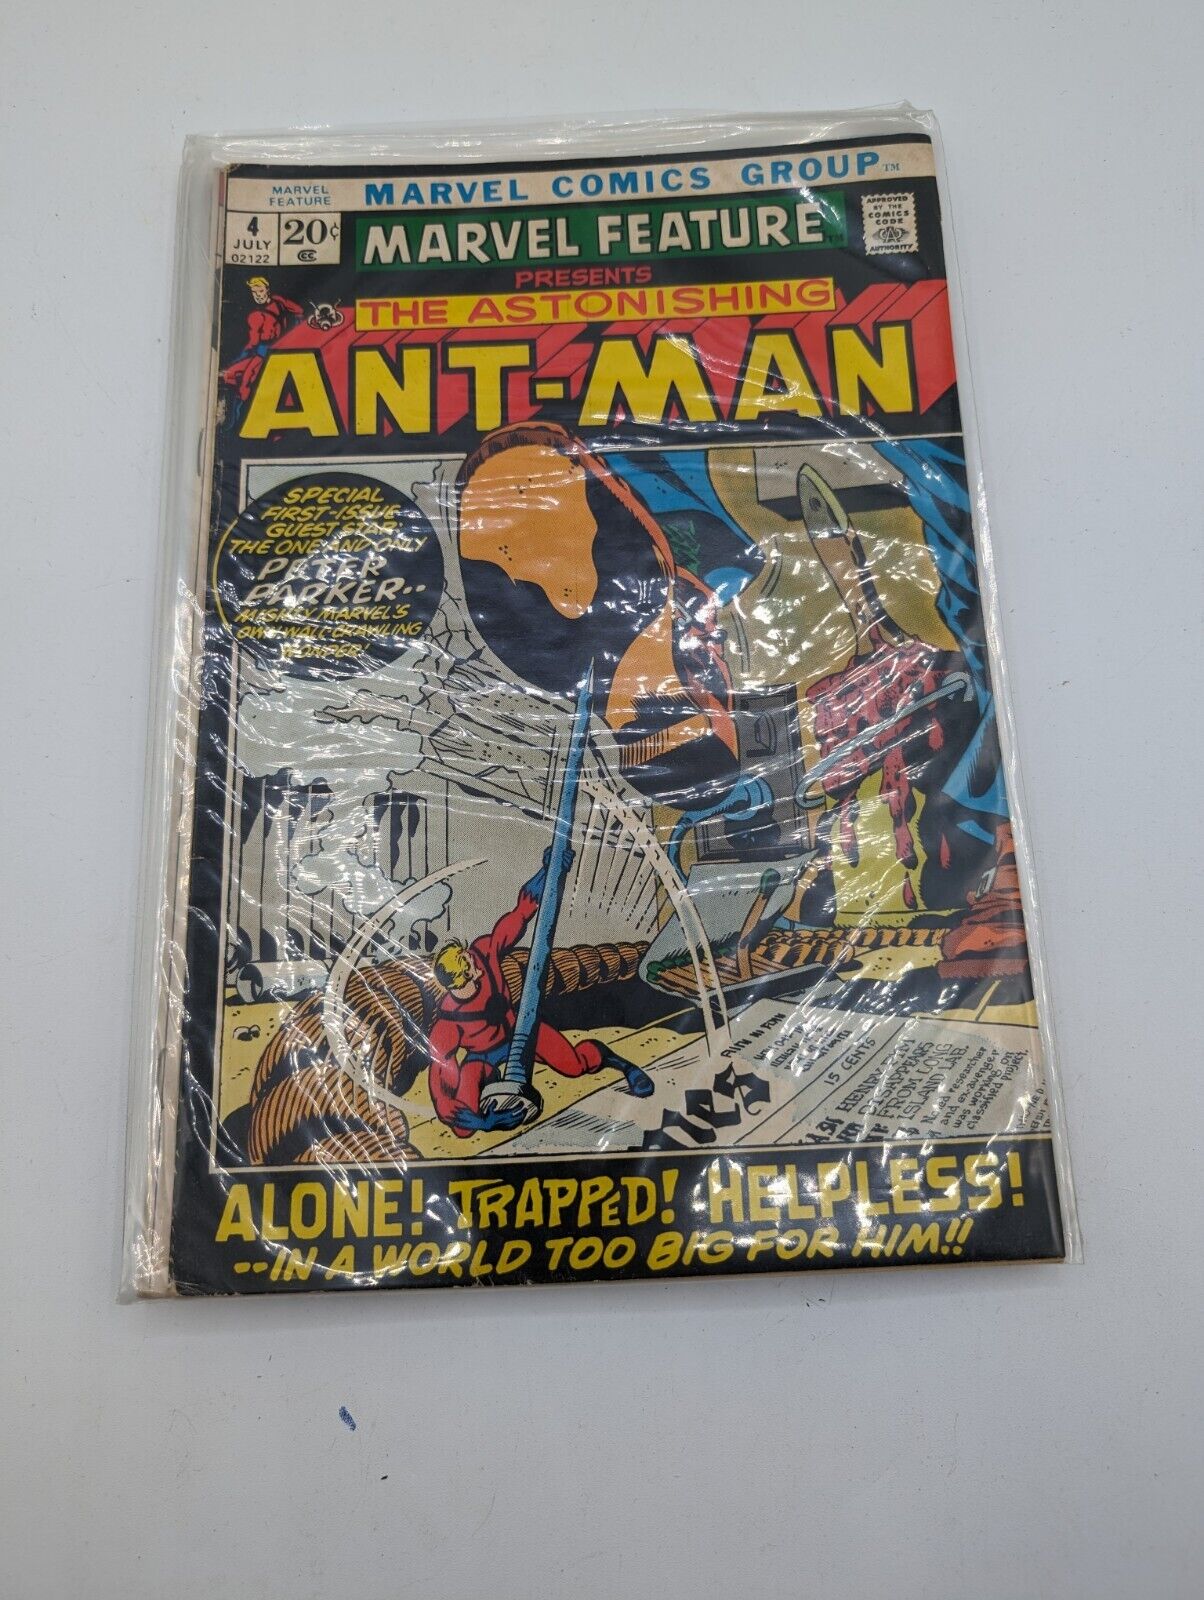 MARVEL FEATURE #4 ANT-MAN Marvel BRONZE AGE